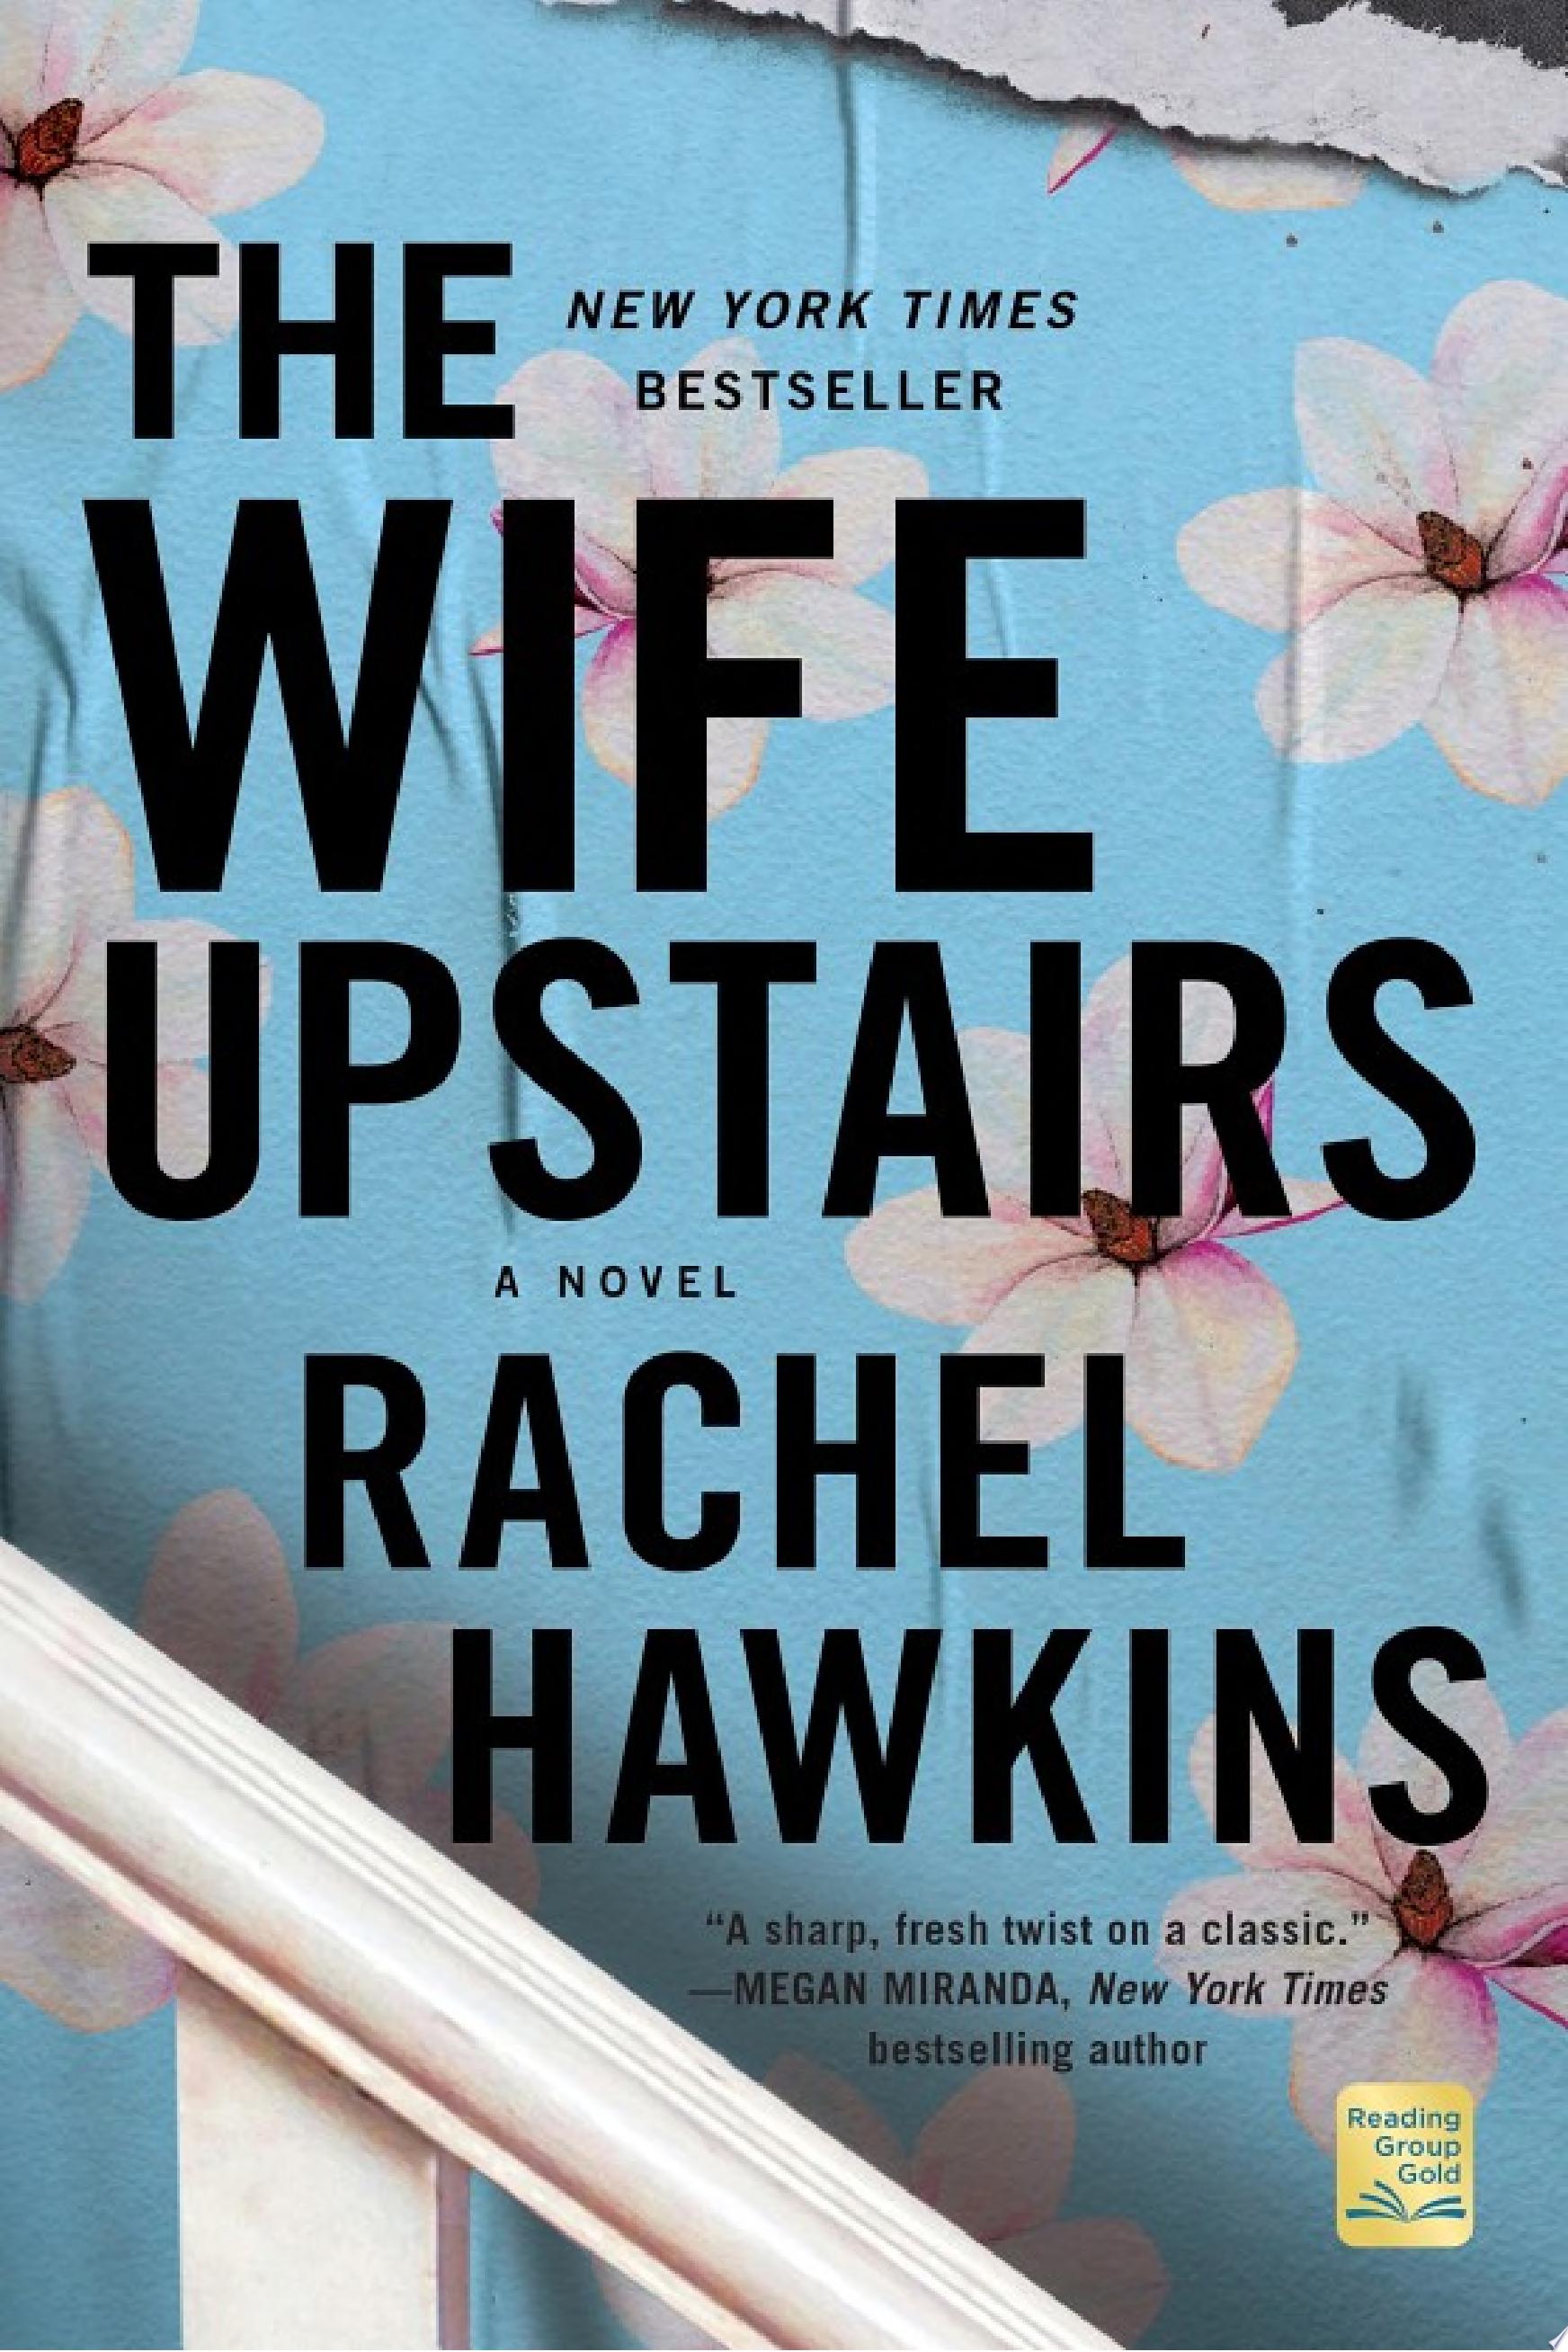 Image for "The Wife Upstairs"